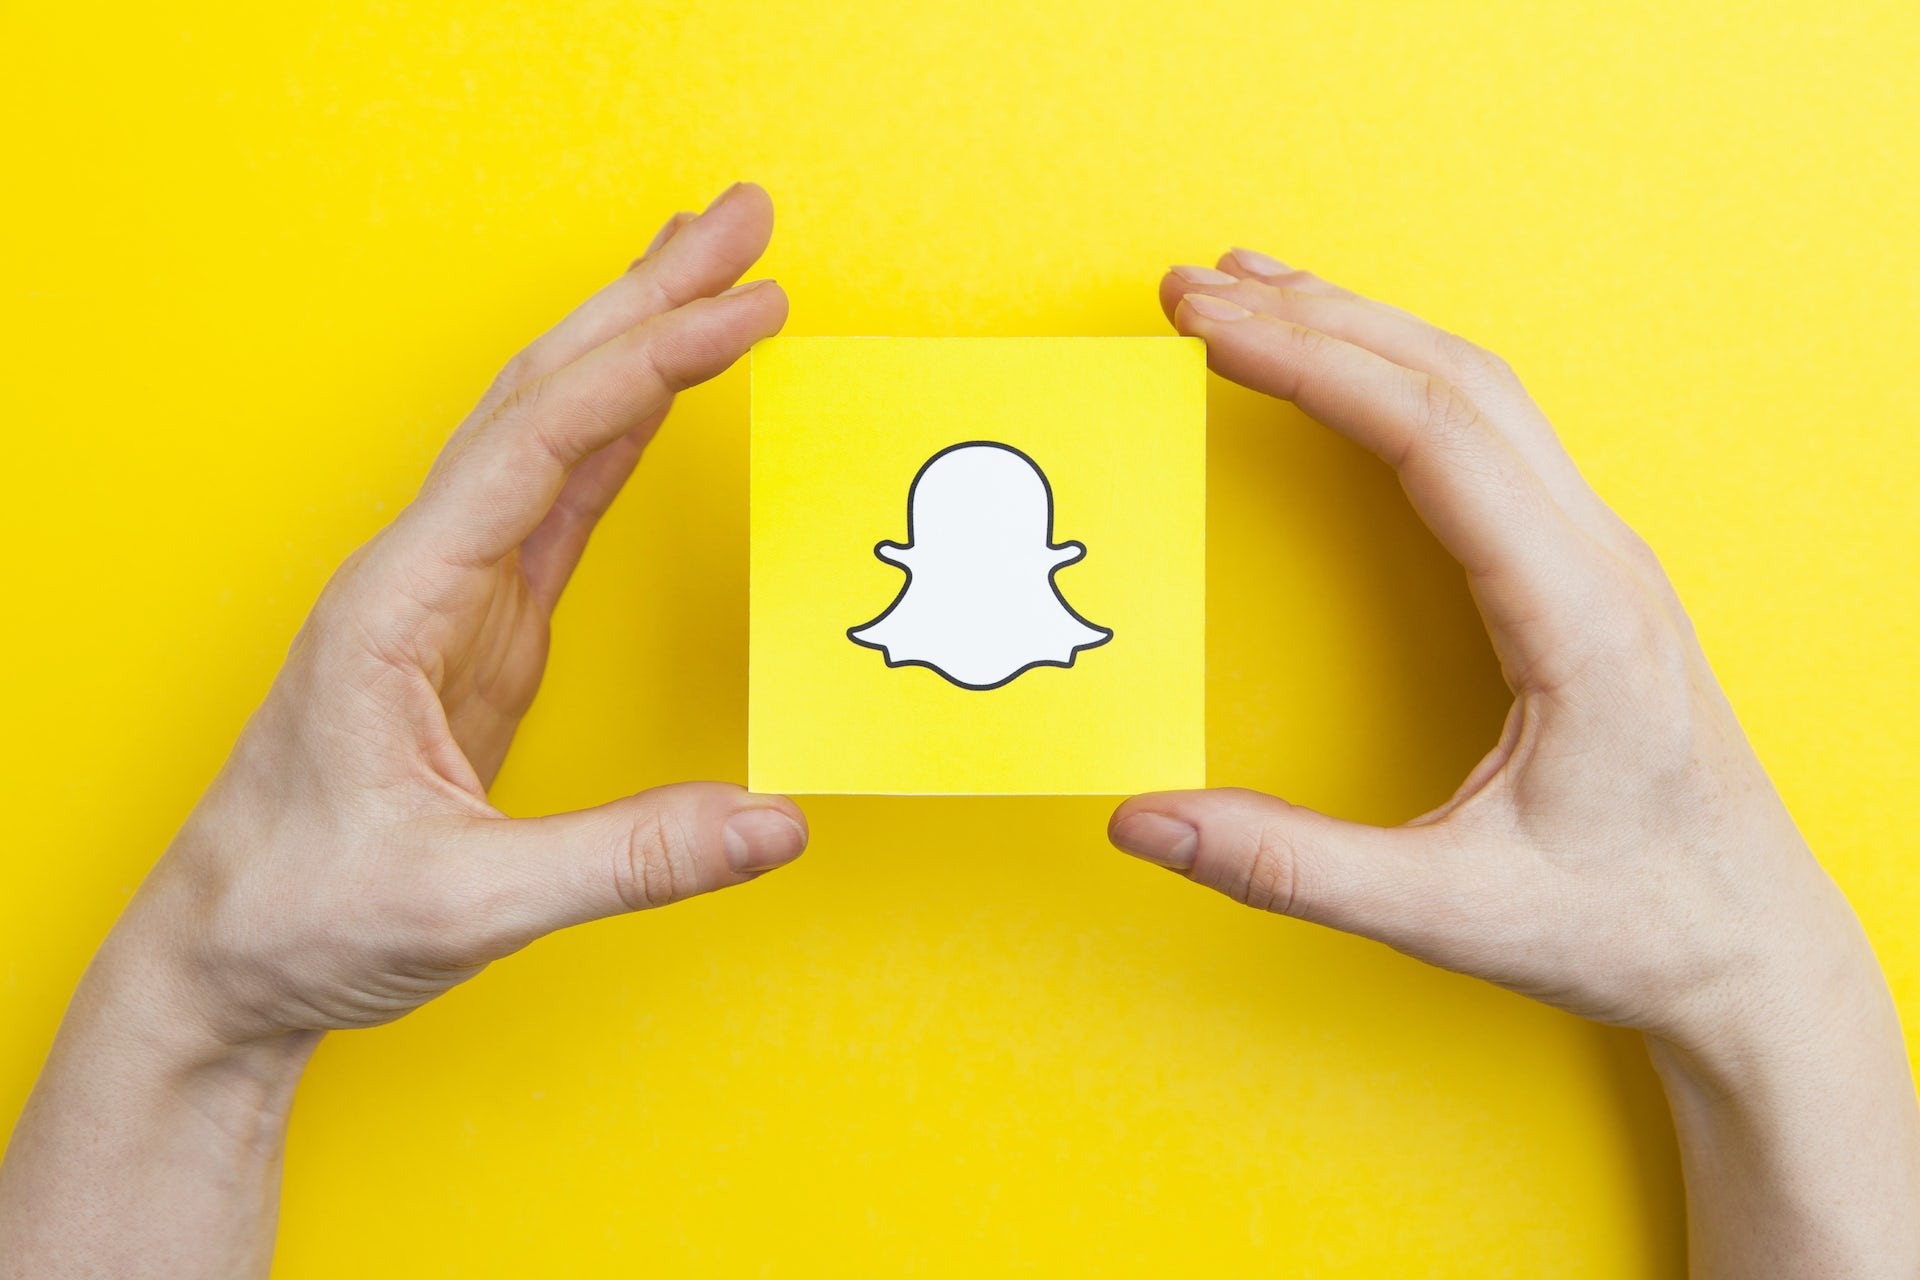 The recent AI mishap by Snapchat serves as a reminder that chatbots are not humans, highlighting the increasing risks as the distinction between the two becomes less clear.